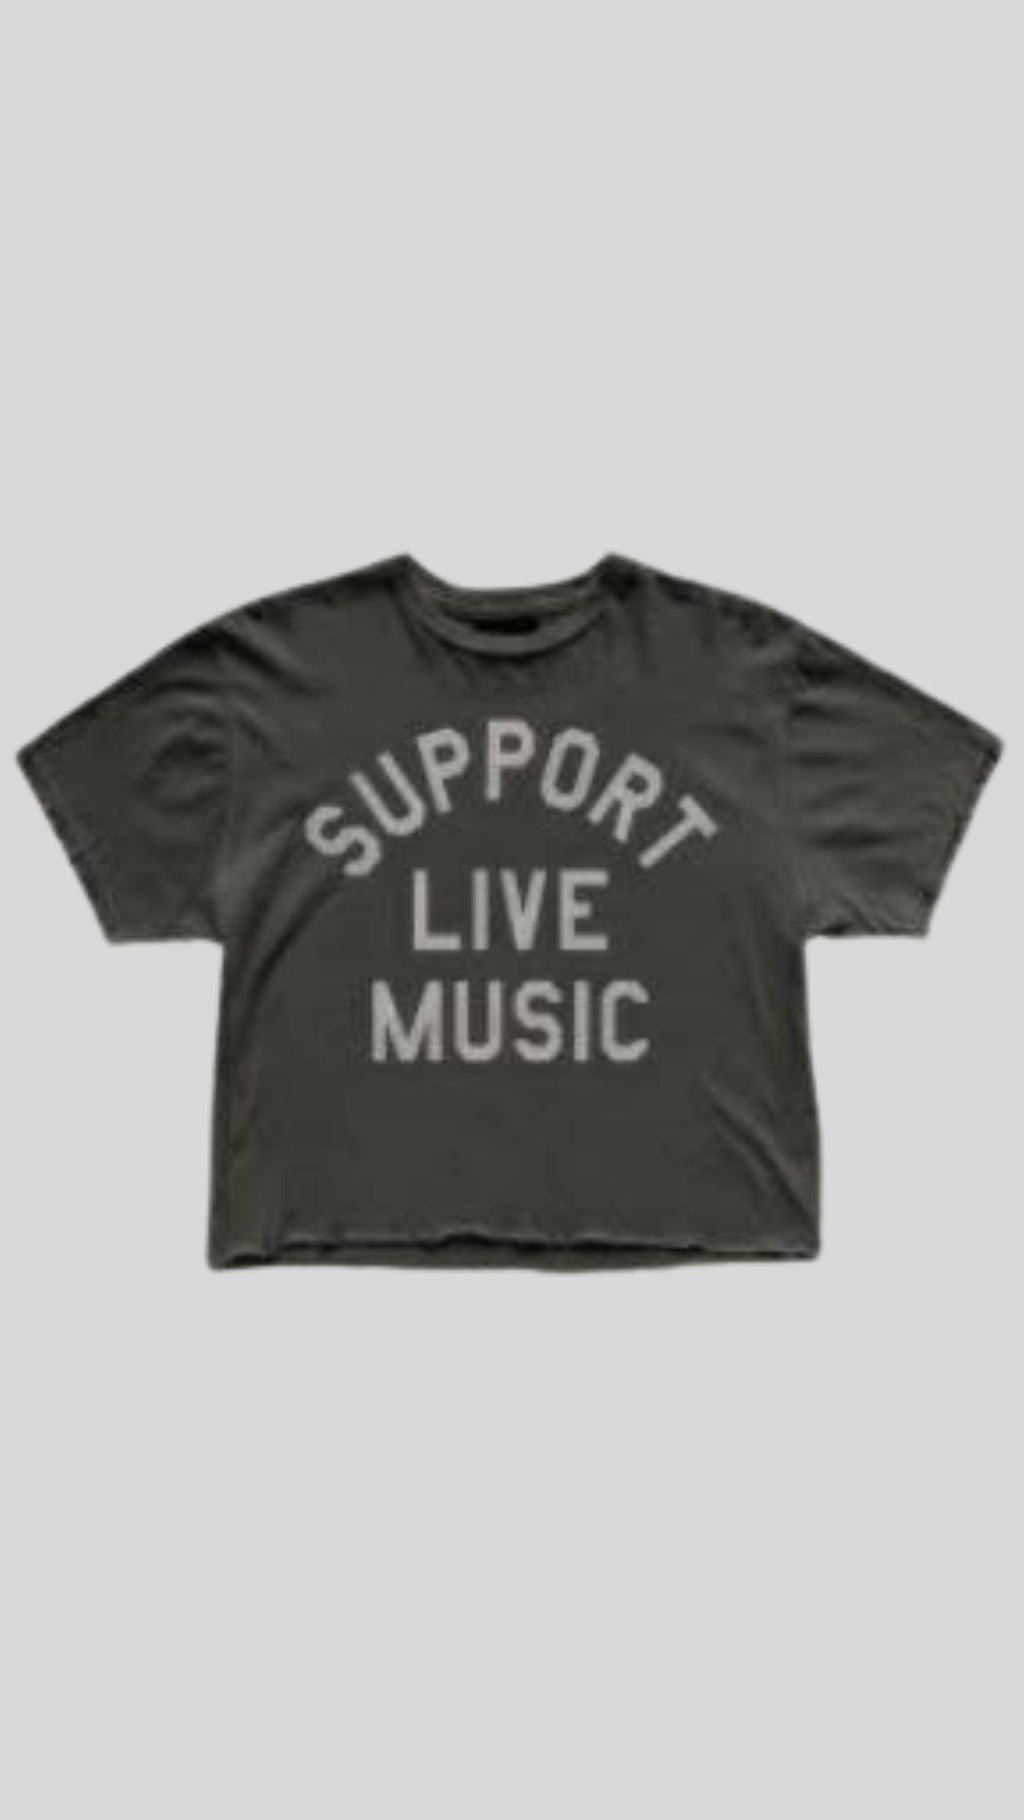 Support Live Music